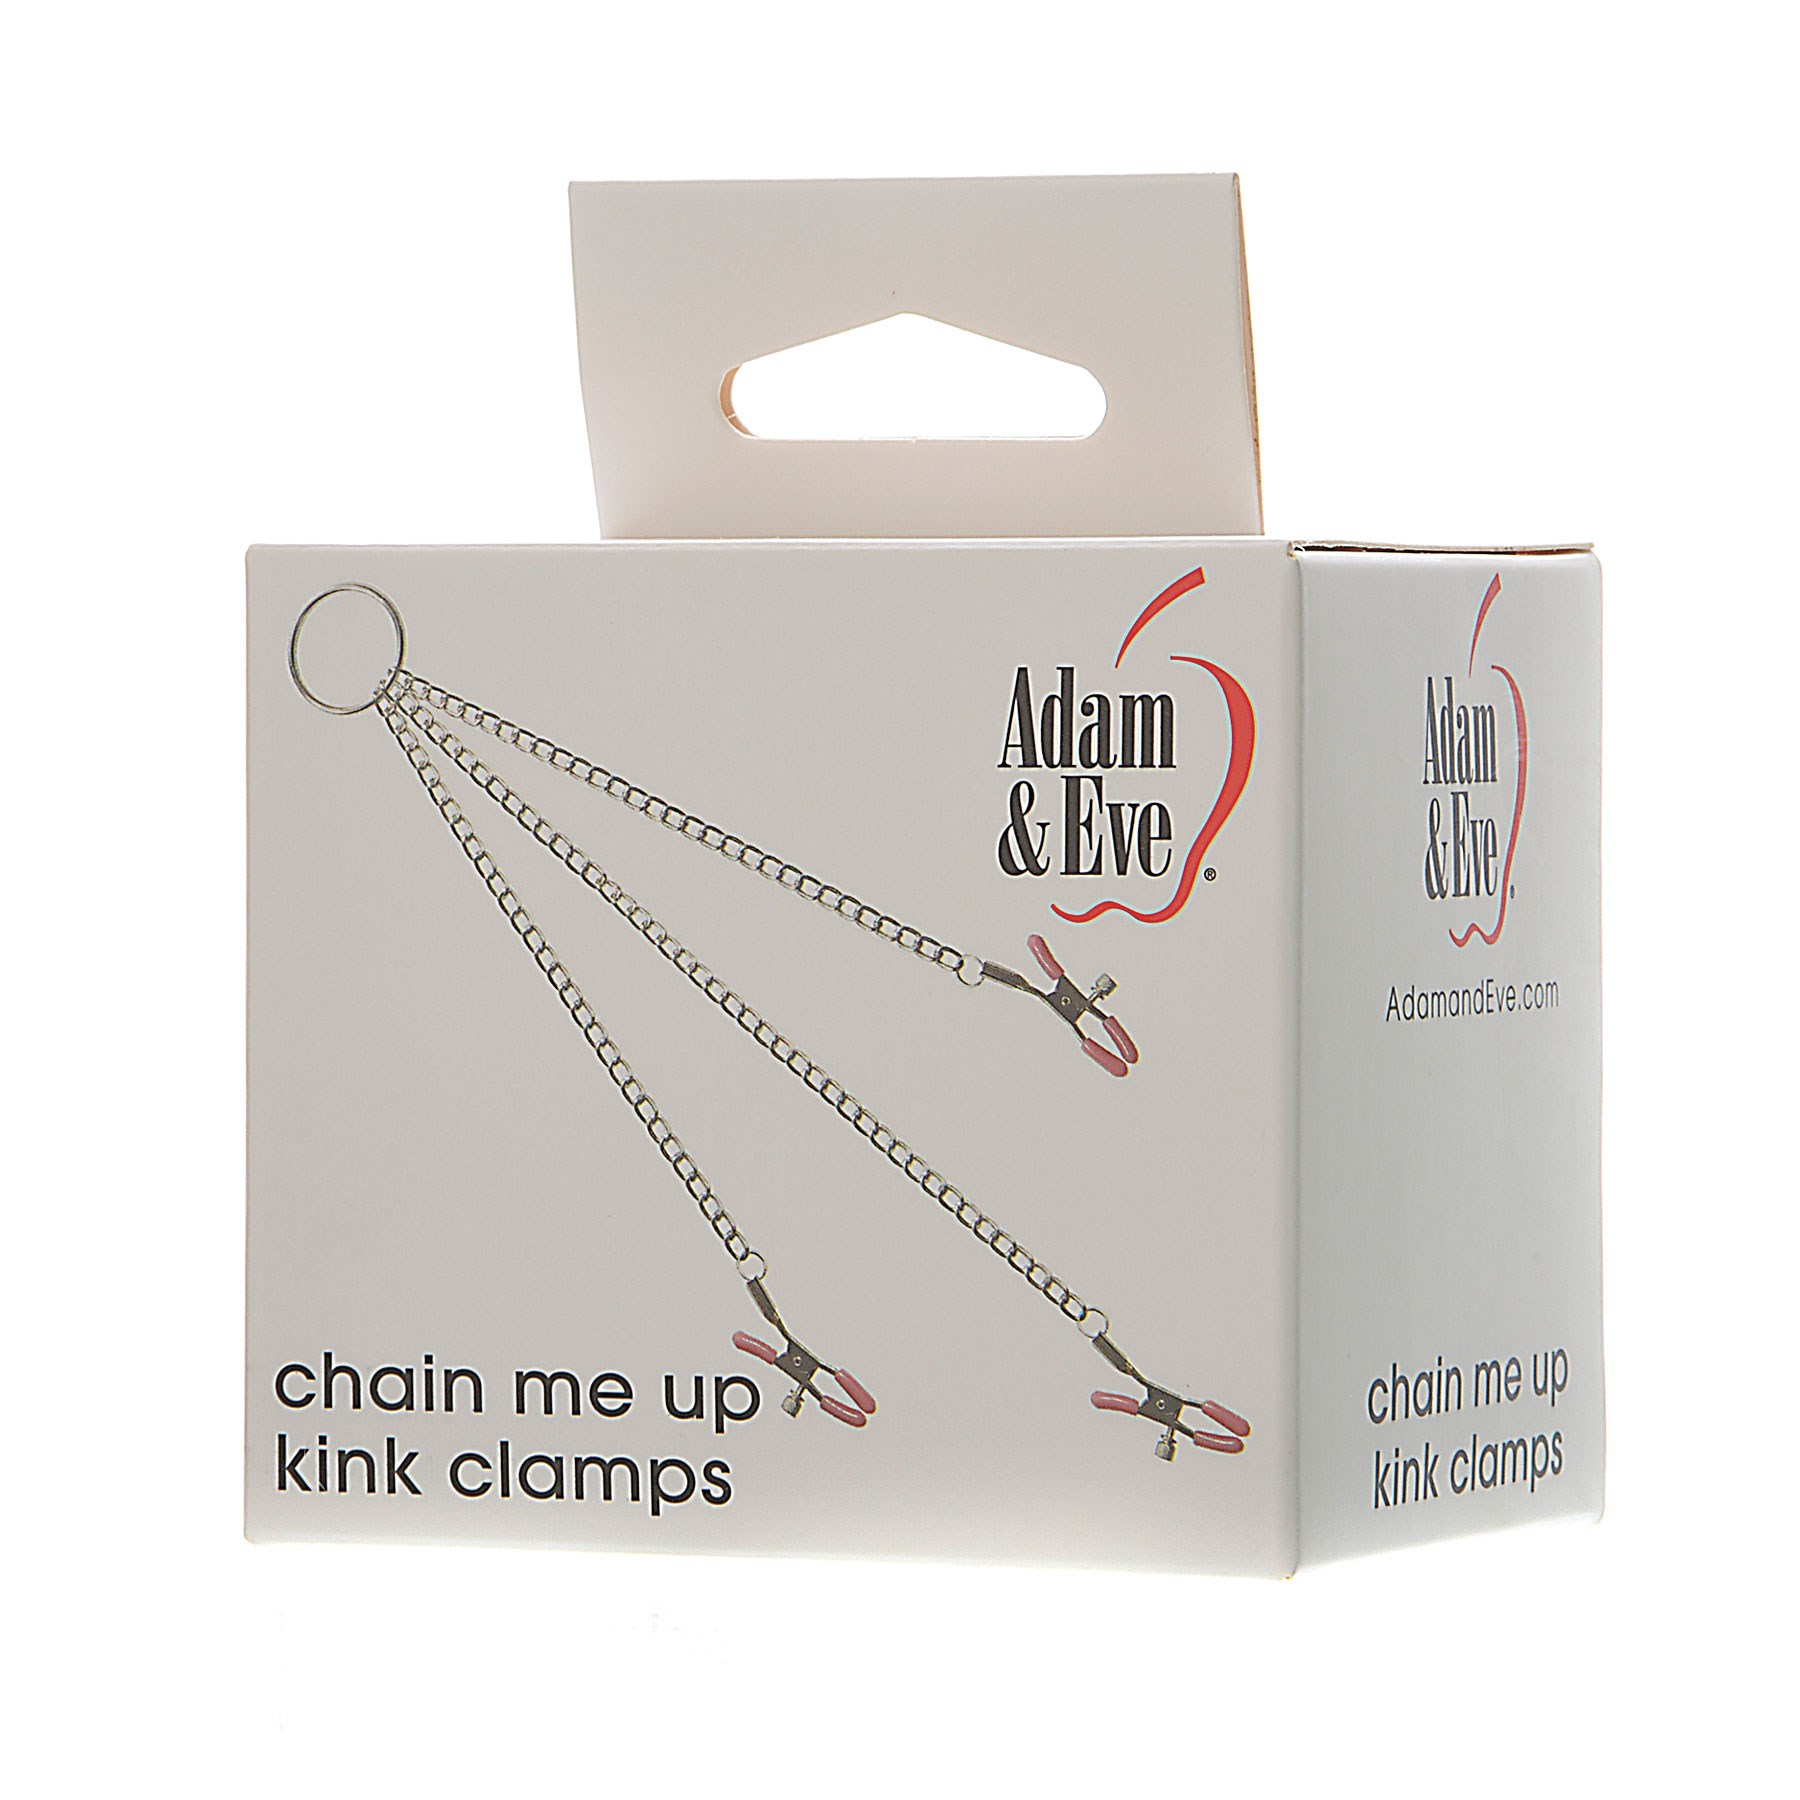 Adam & Eve Chain Me Up Kink Clamps box cover